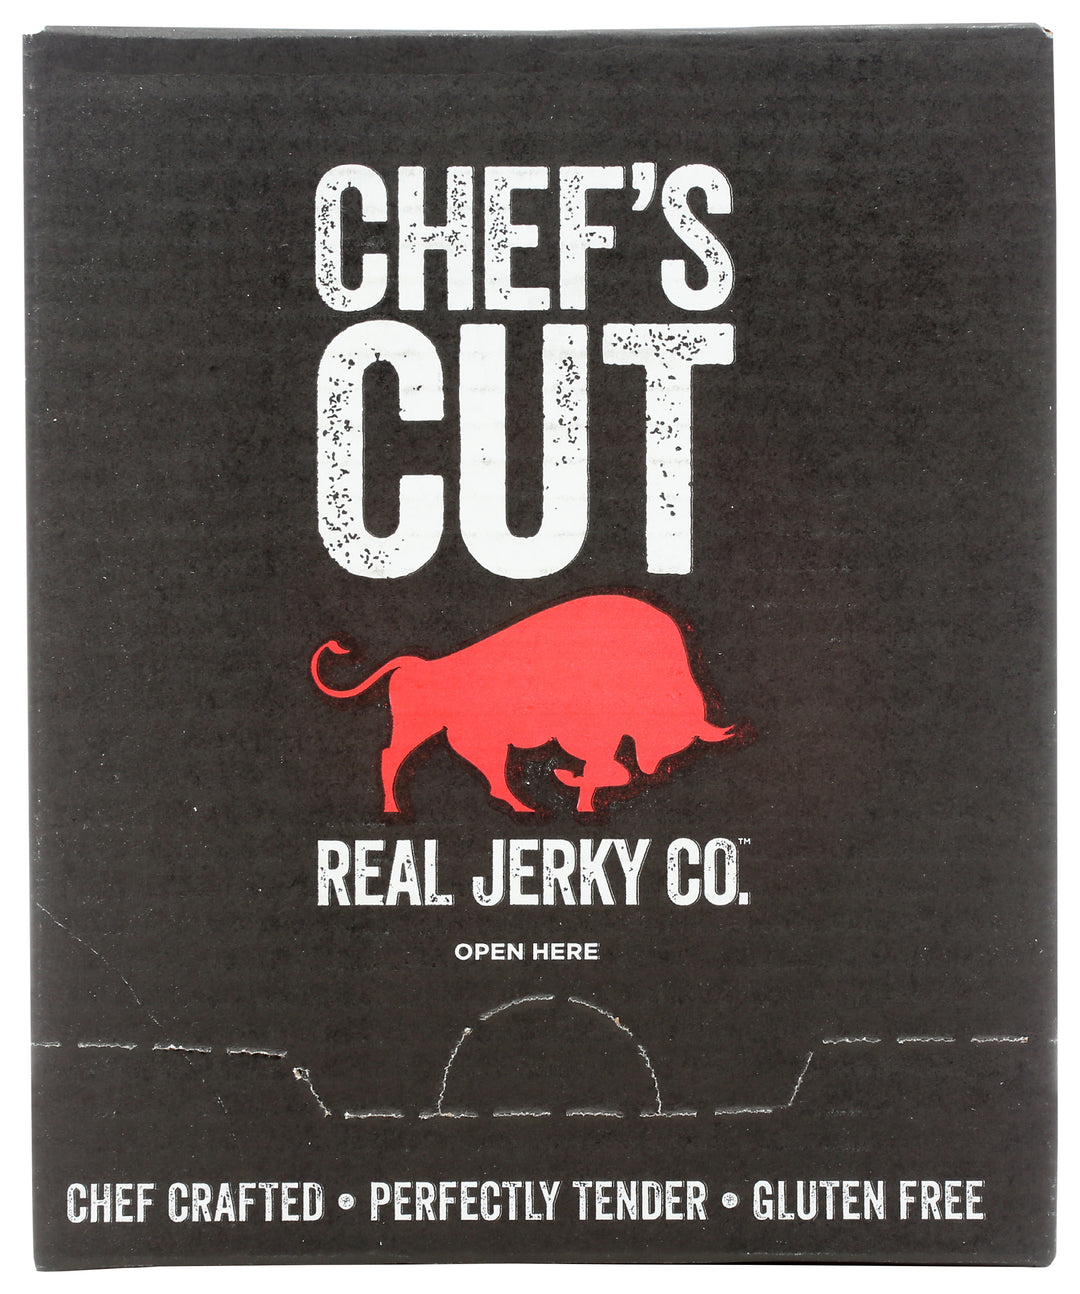 Chef's Cut Real Jerky Co. Smoked Chicken Breast Honey Barbeque-2.5 oz.-8/Case